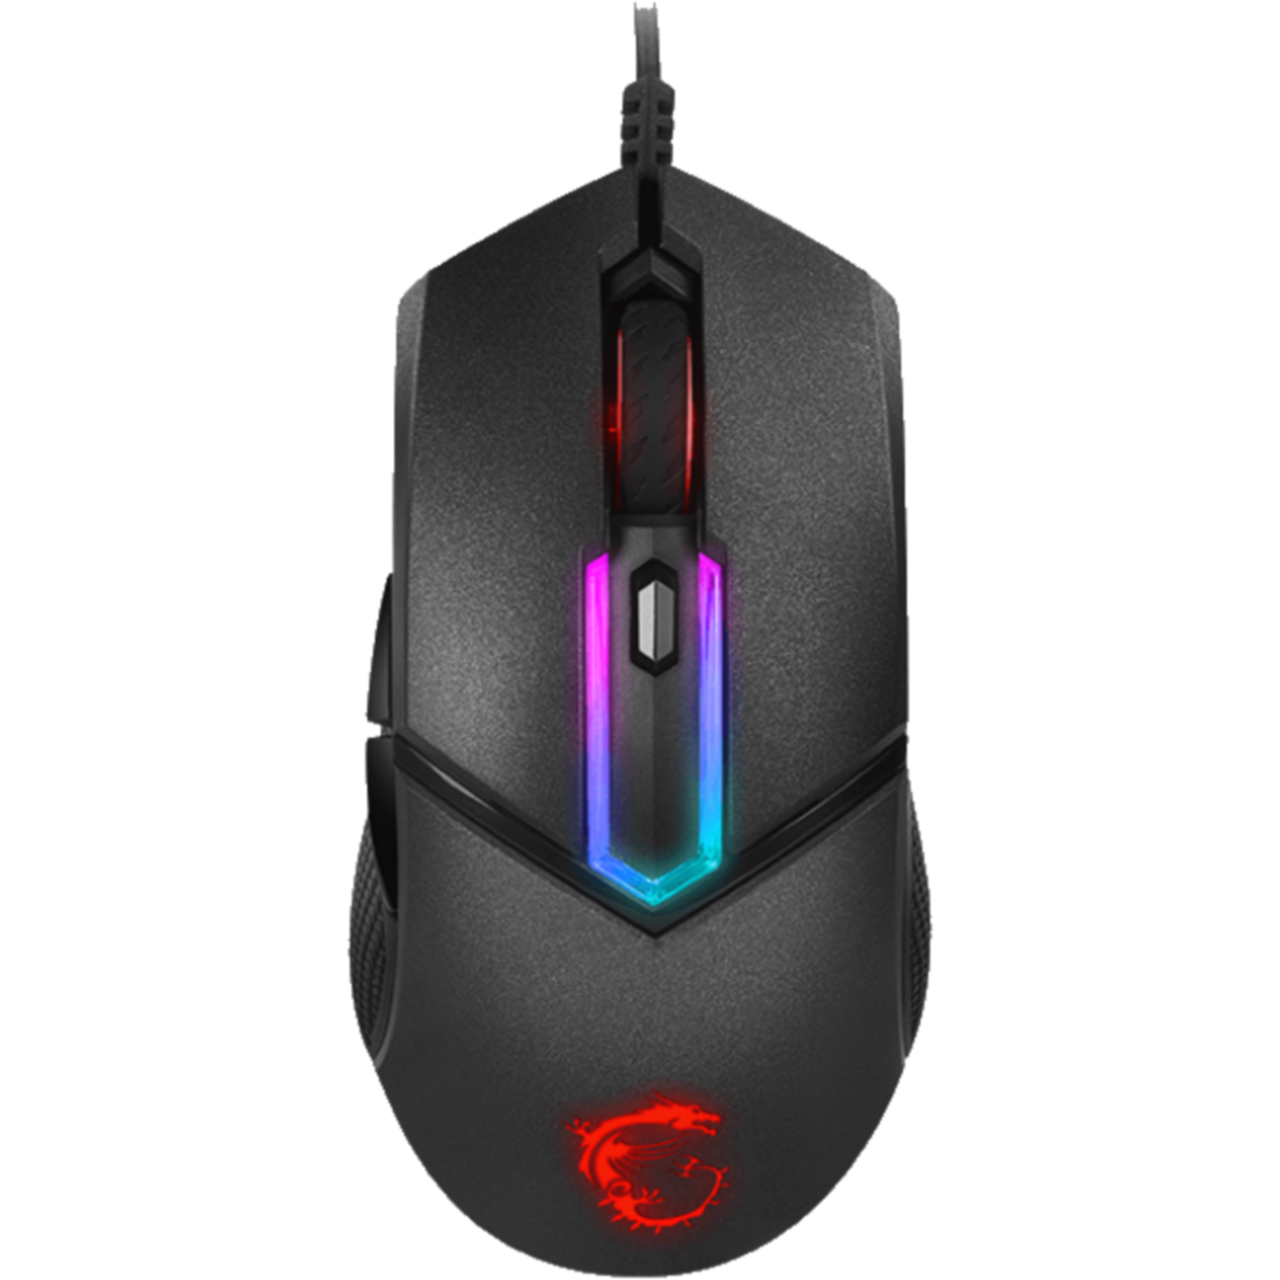 MSI Clutch GM30 Wired USB Optical Mouse Review